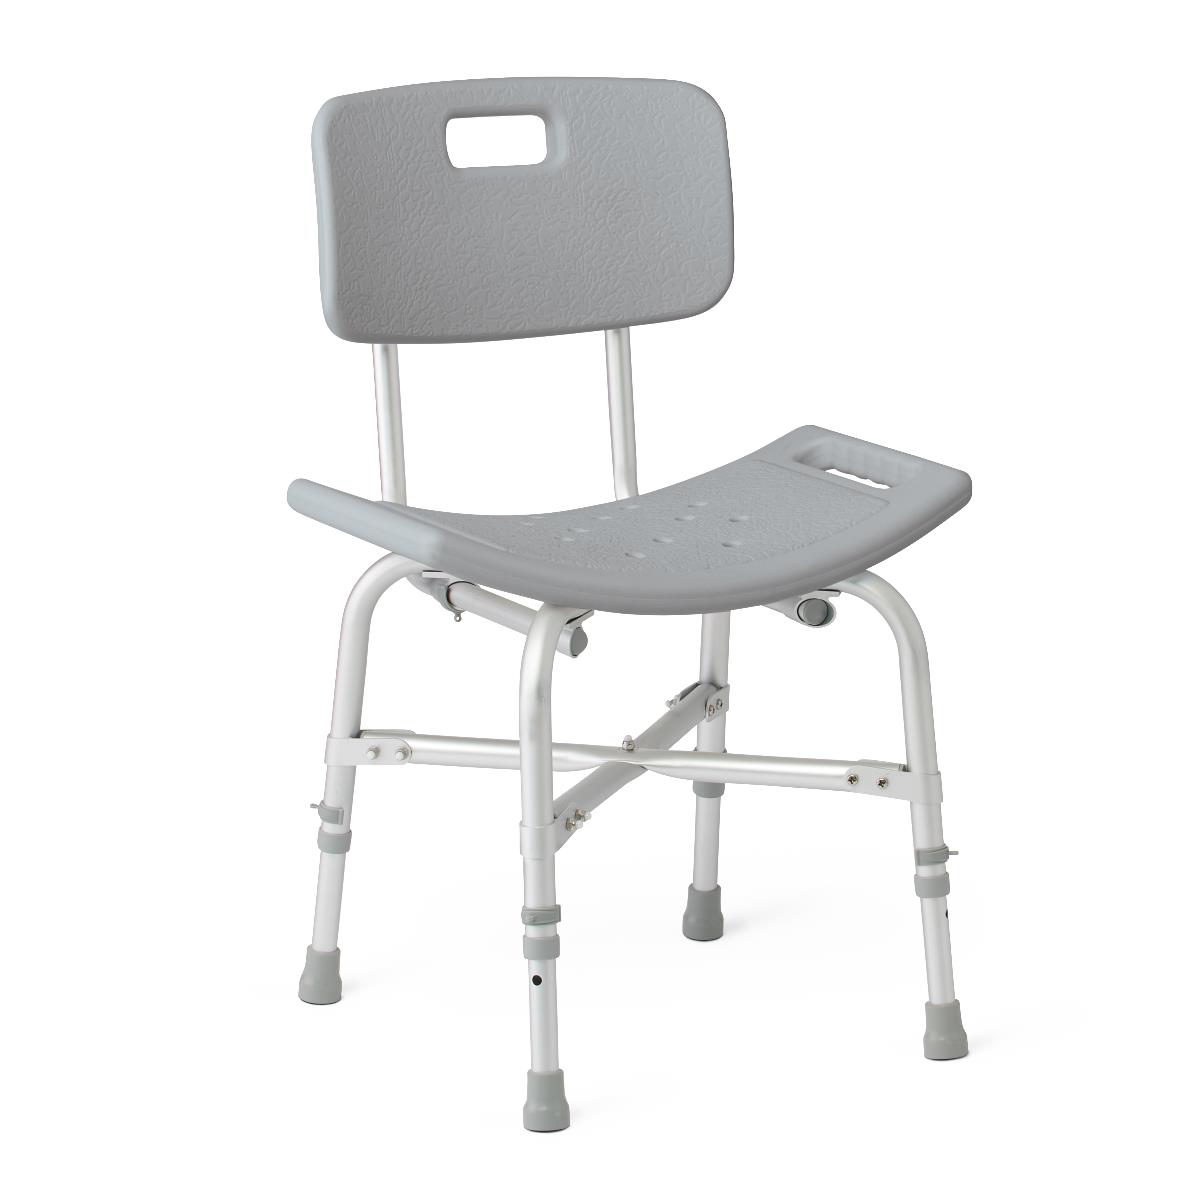 Medline Bariatric Shower Chair with Back G2-102BX1